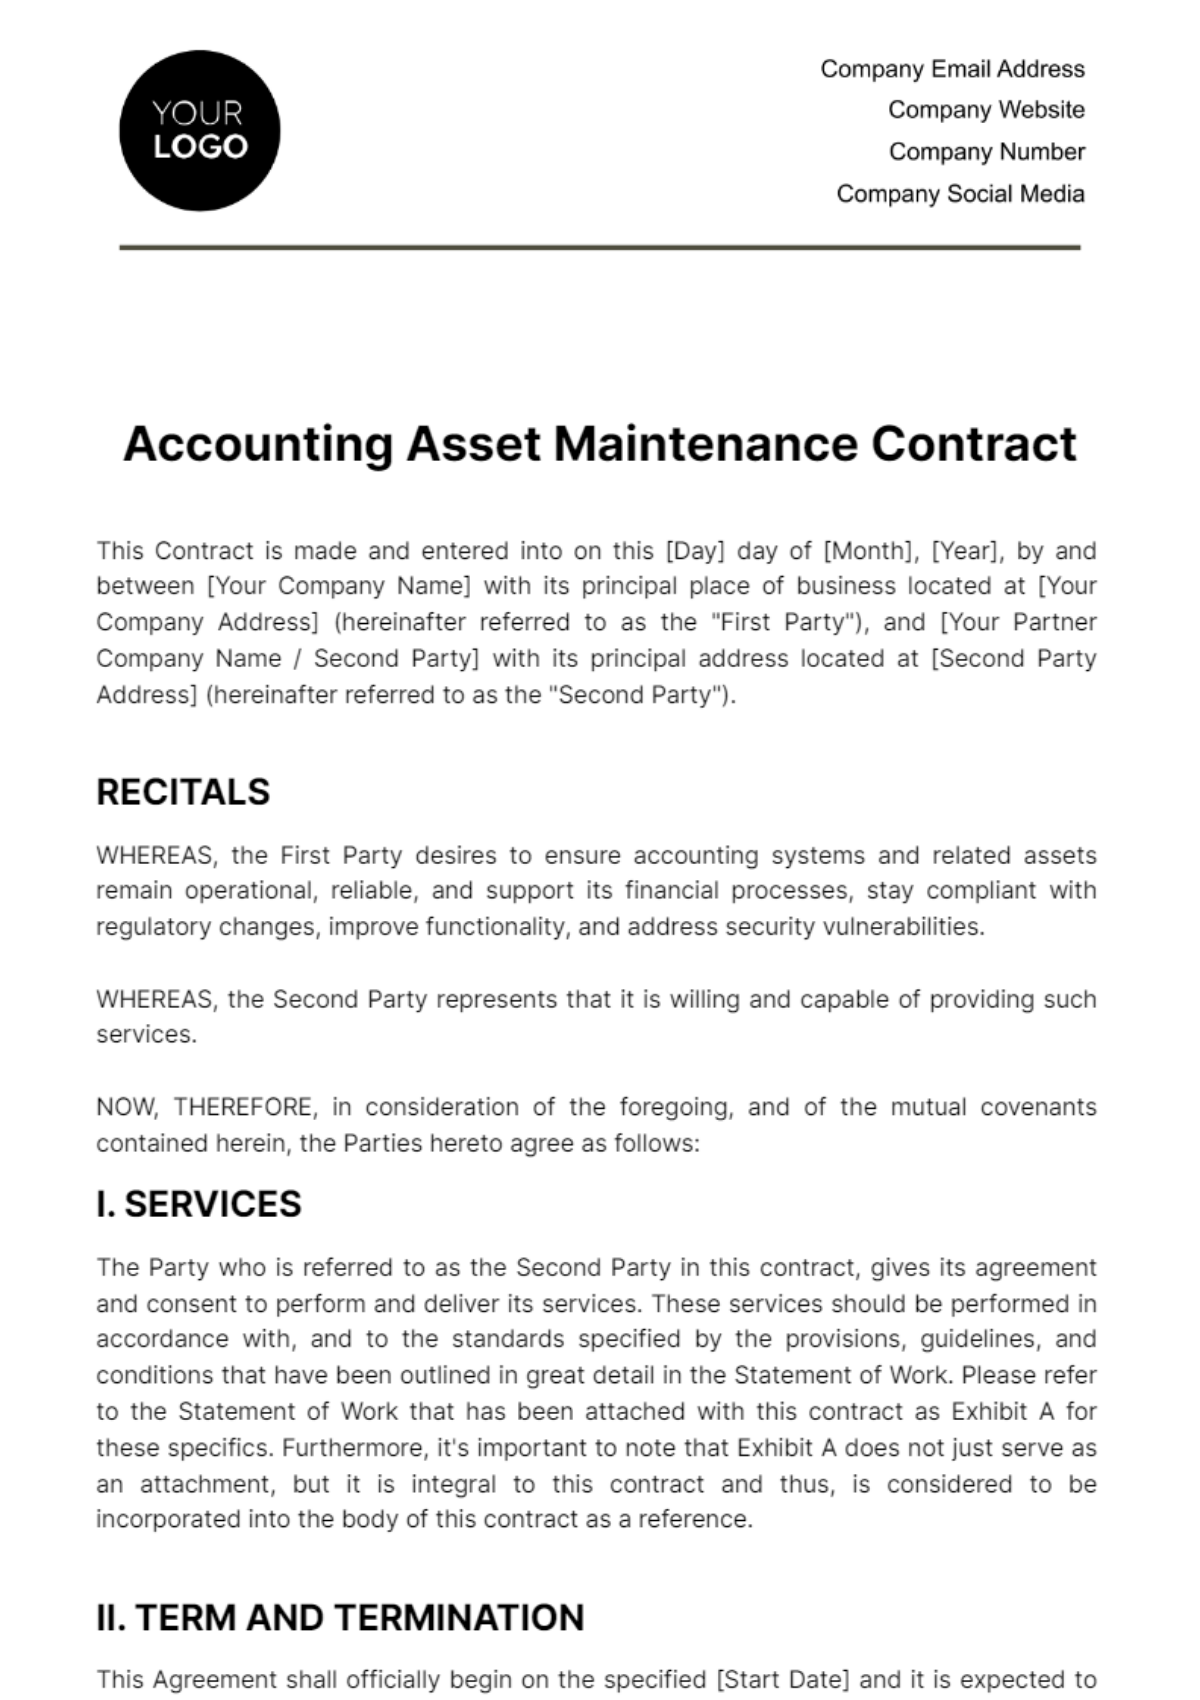 Free Accounting Asset Maintenance Contract Template